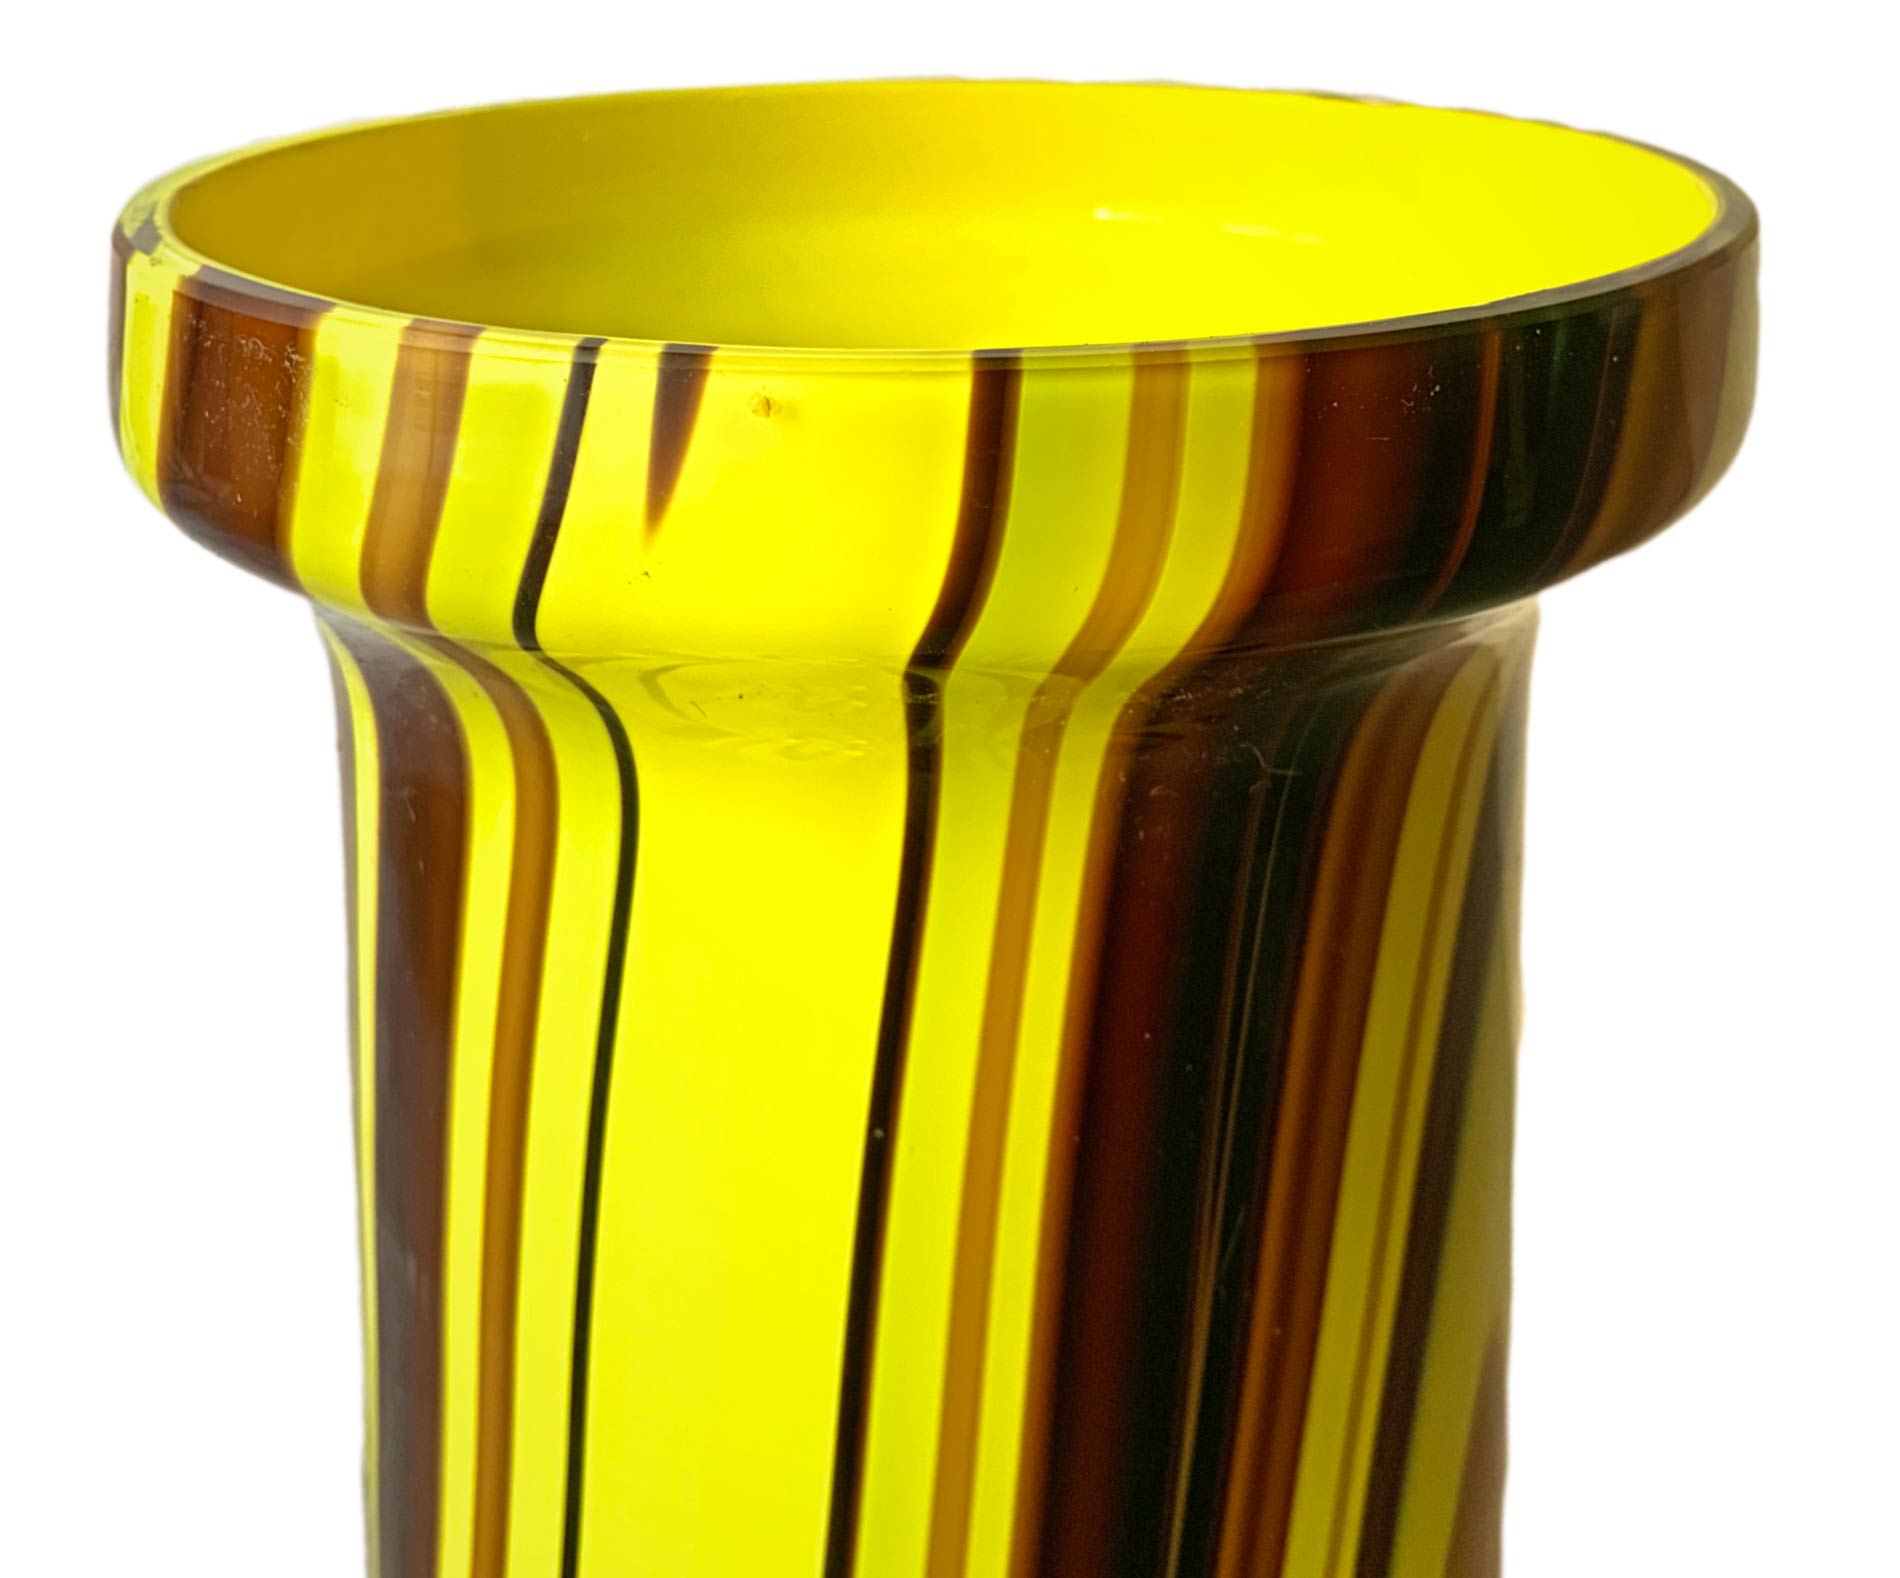 Carlo Moretti, Murano. Variegated glass vase with yellow and shades of brown, spherical body, tall - Image 3 of 4